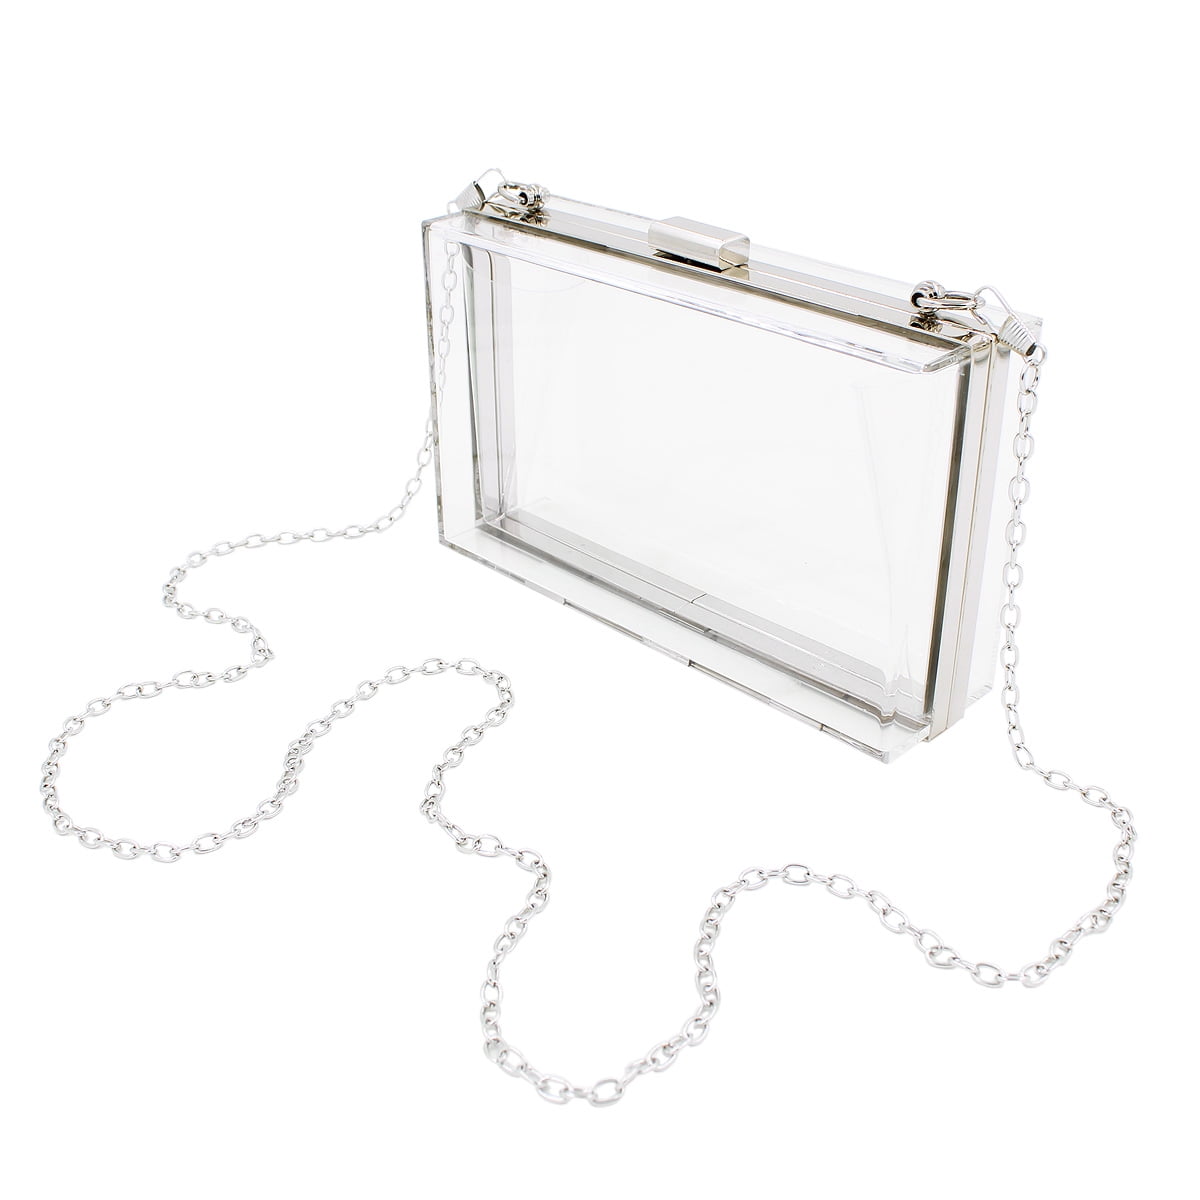 DODAMOUR Clear Purse Acrylic Clutch Bag for Women, Square Transparent  Crossbody Evening Bag with Adjustable Long Shoulder Strap